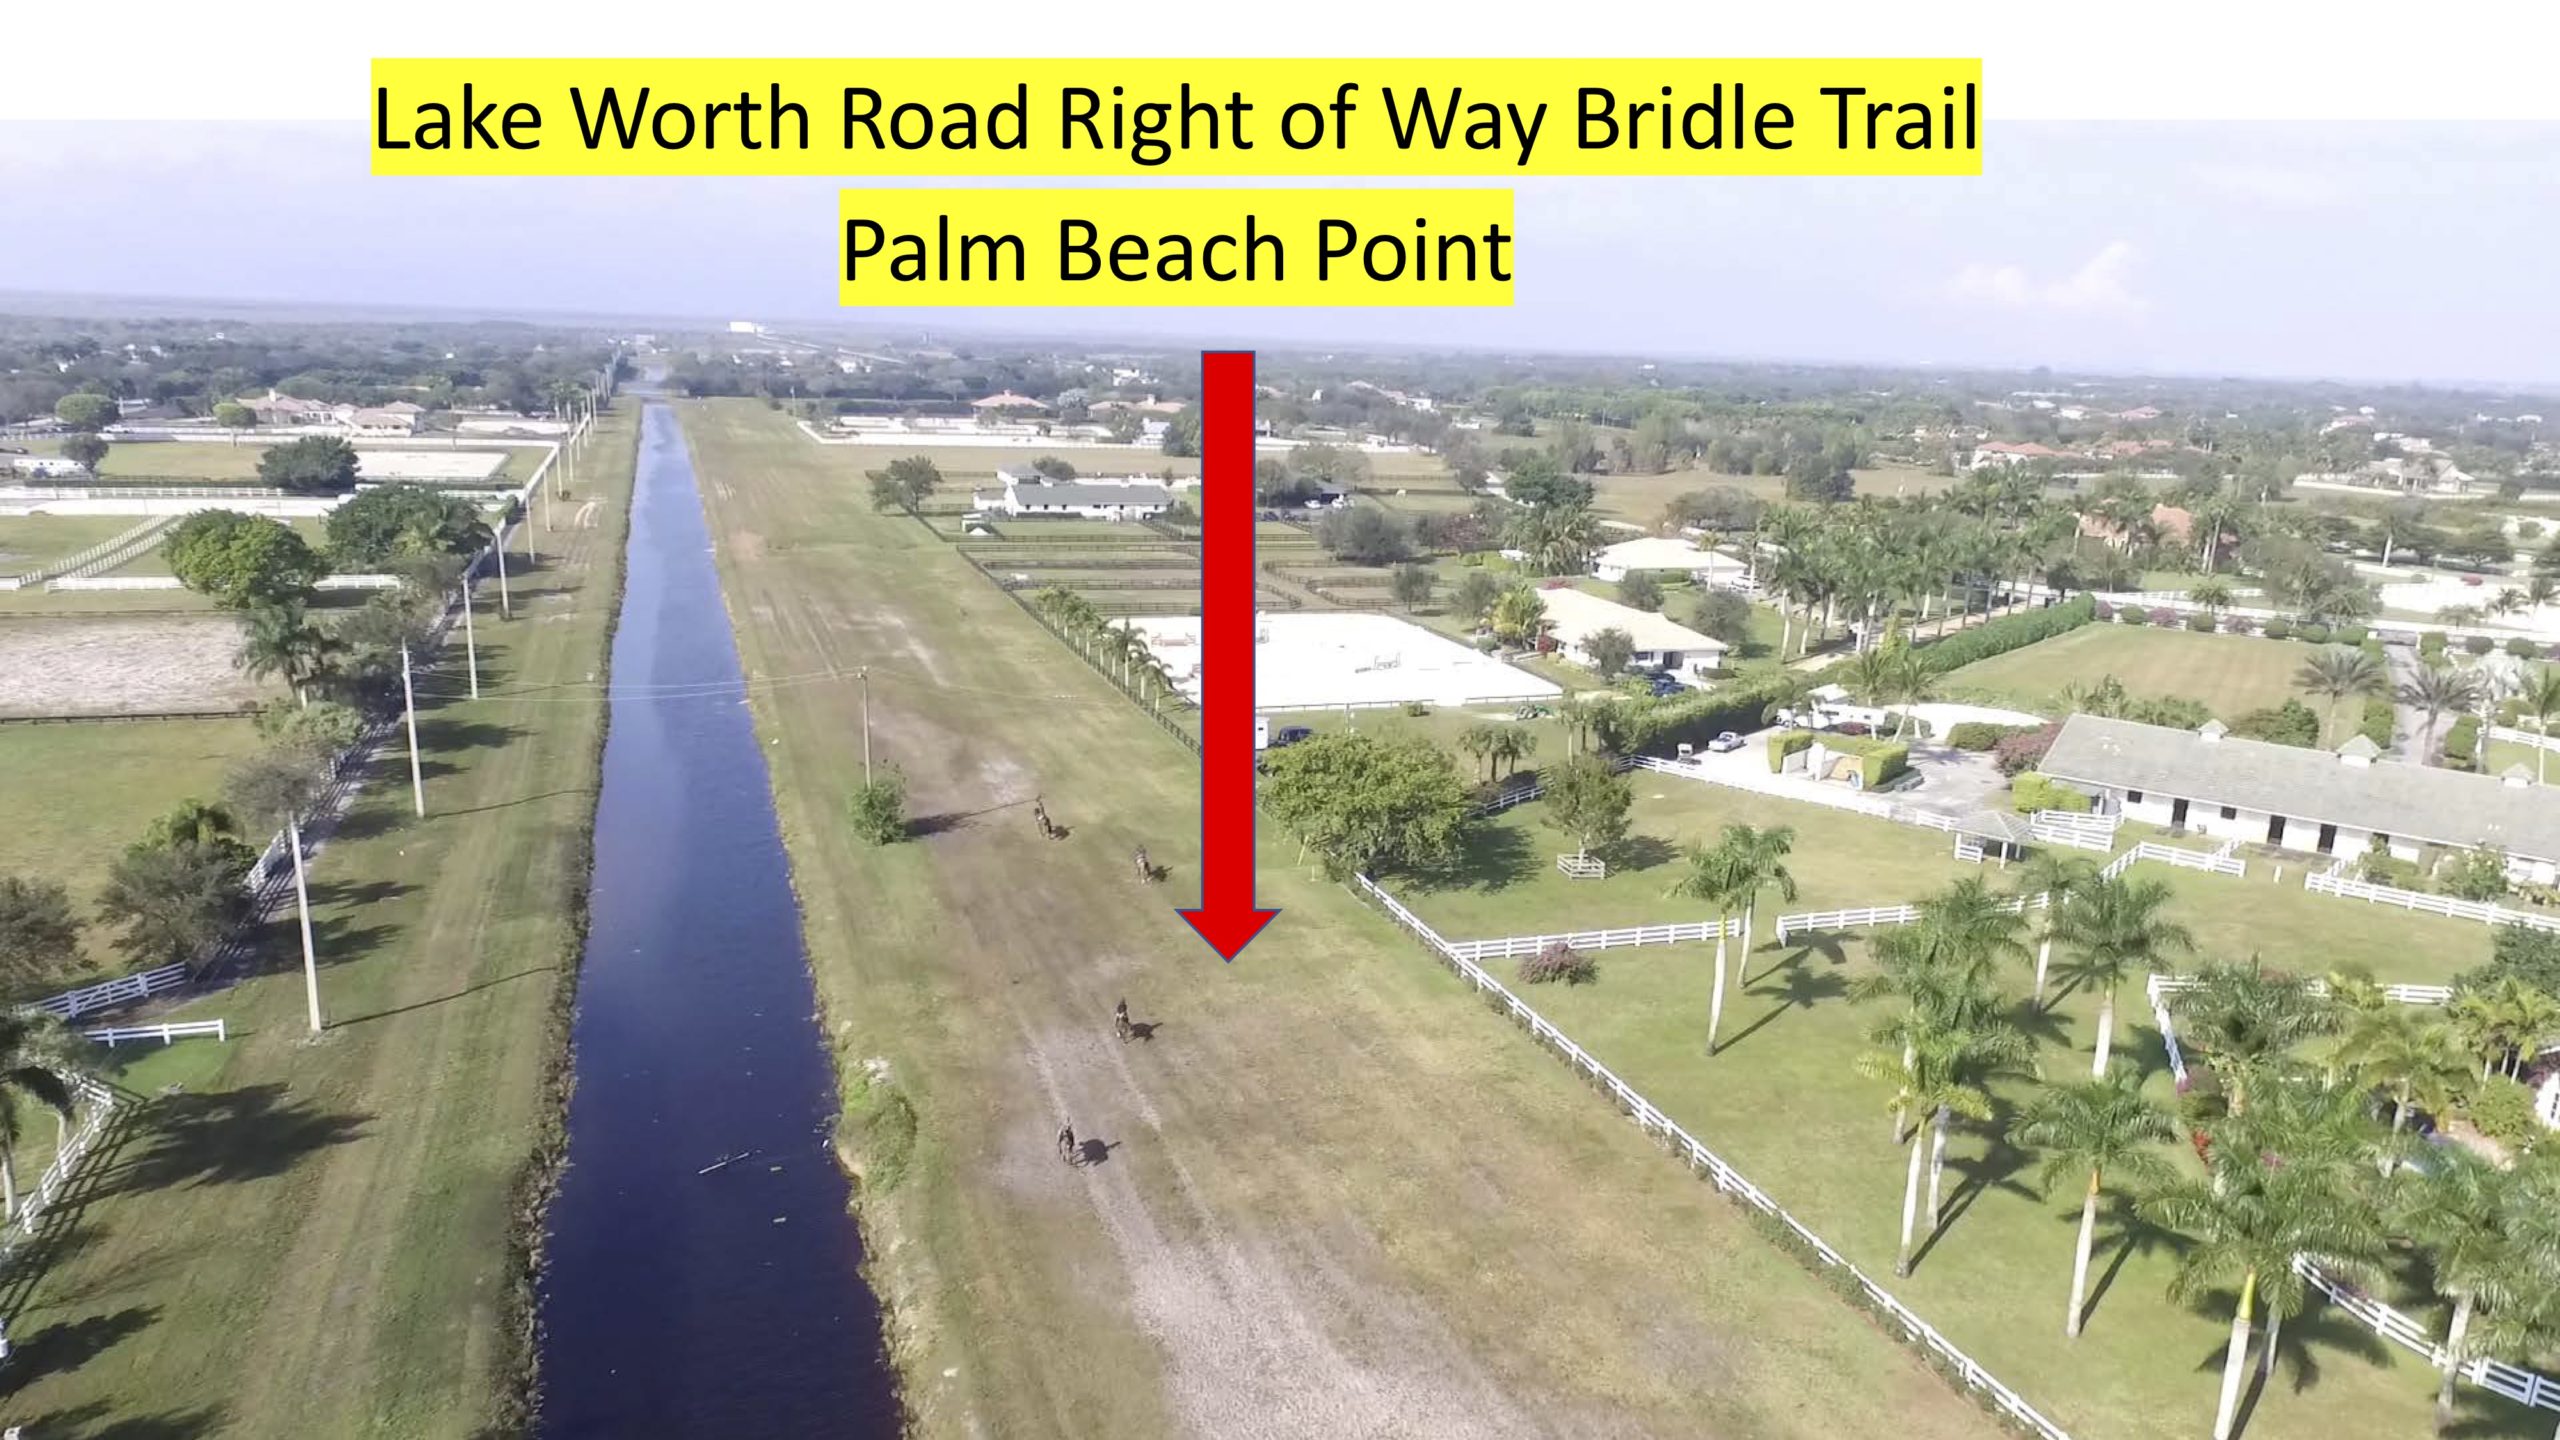 Update on “Big Sunnyland Canal Bridle Trail” Following Wellington Village Council Meeting